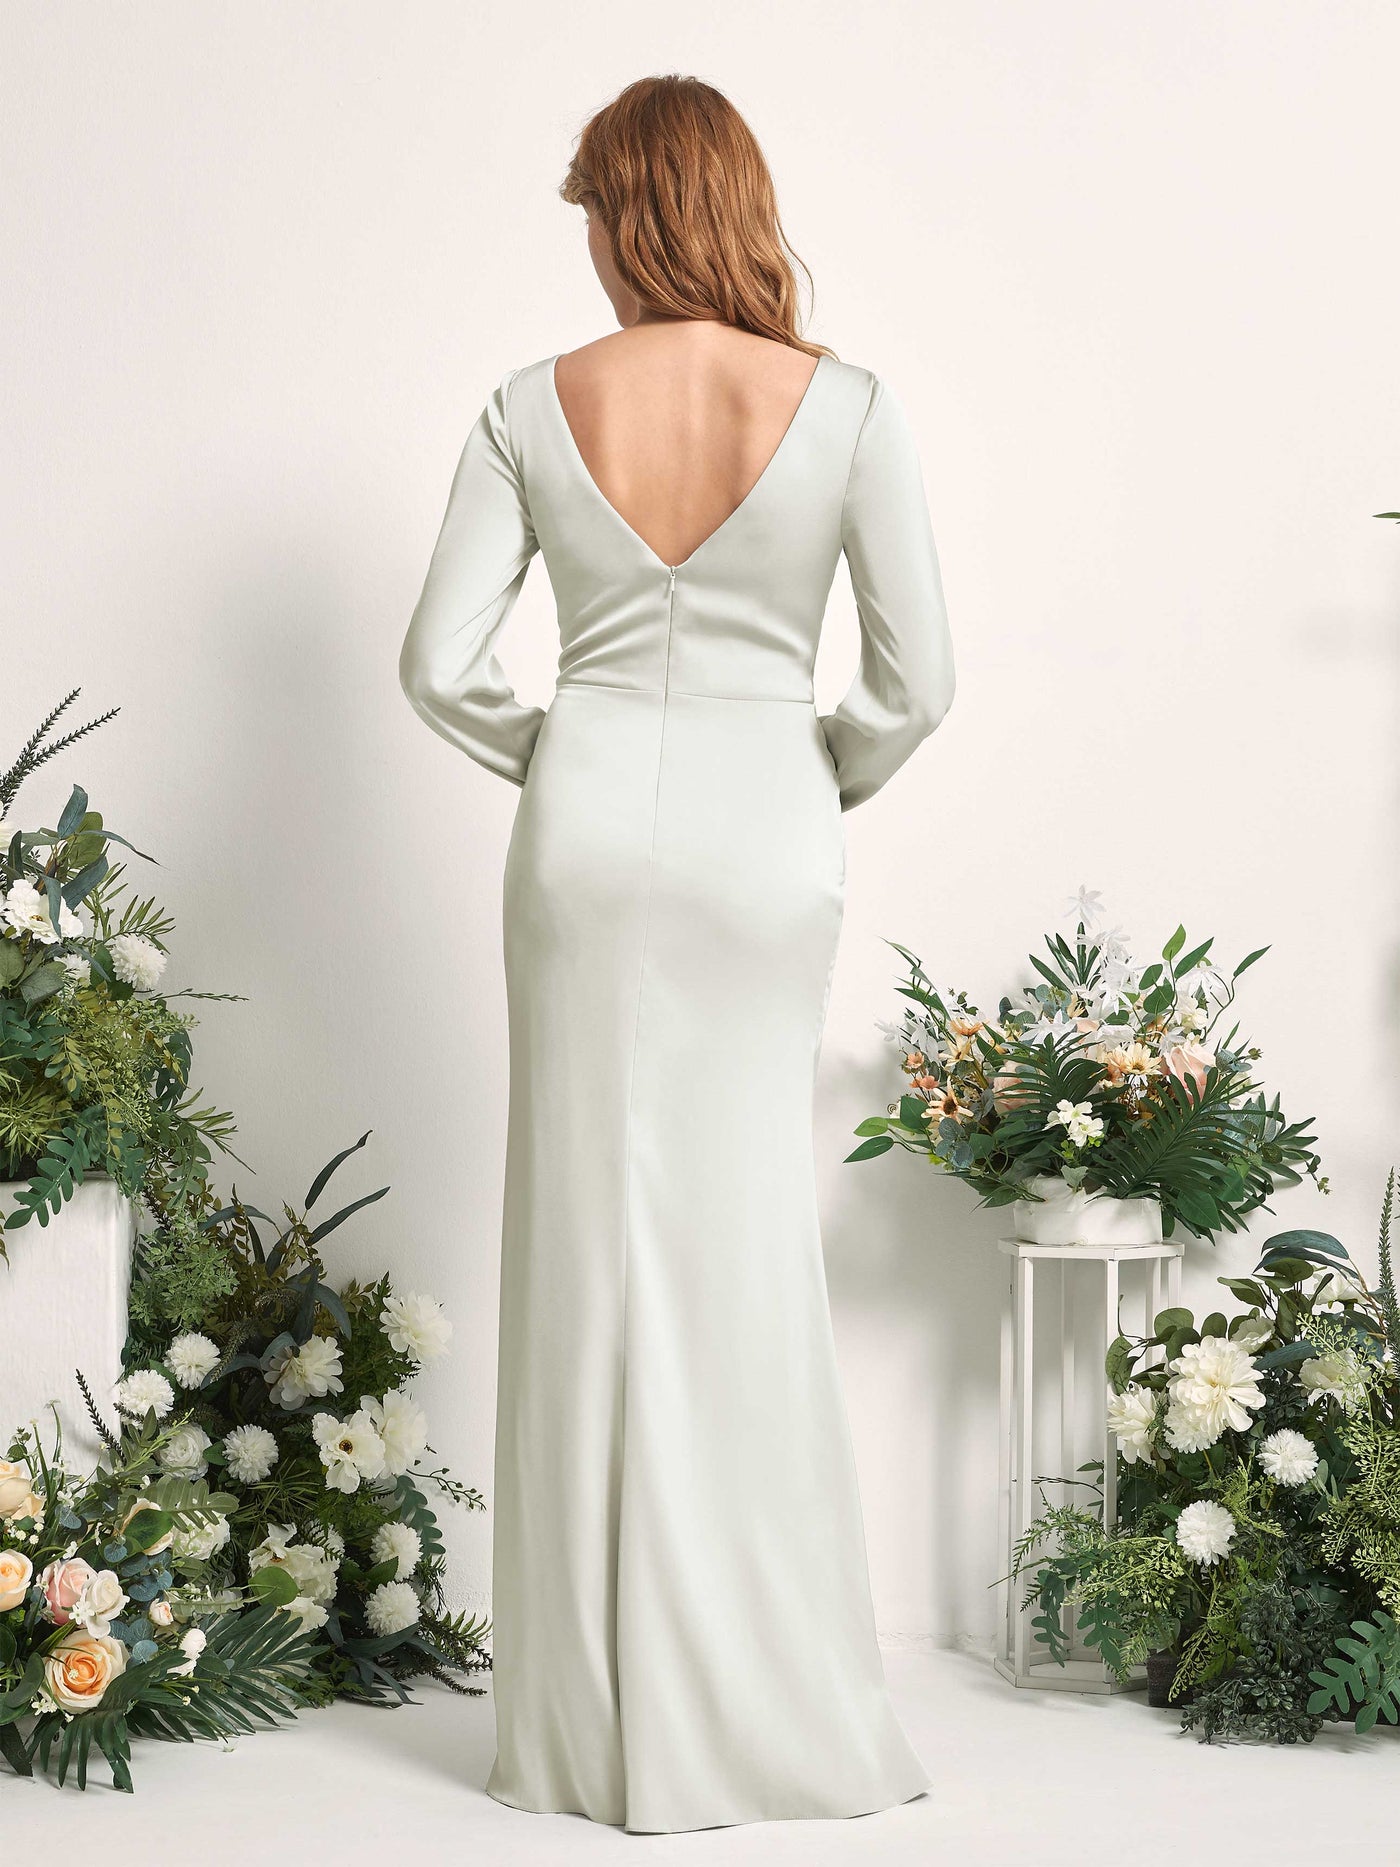 Ivory Bridesmaid Dresses Bridesmaid Dress Ball Gown Satin V-neck Full Length Long Sleeves Wedding Party Dress (80225176)#color_ivory